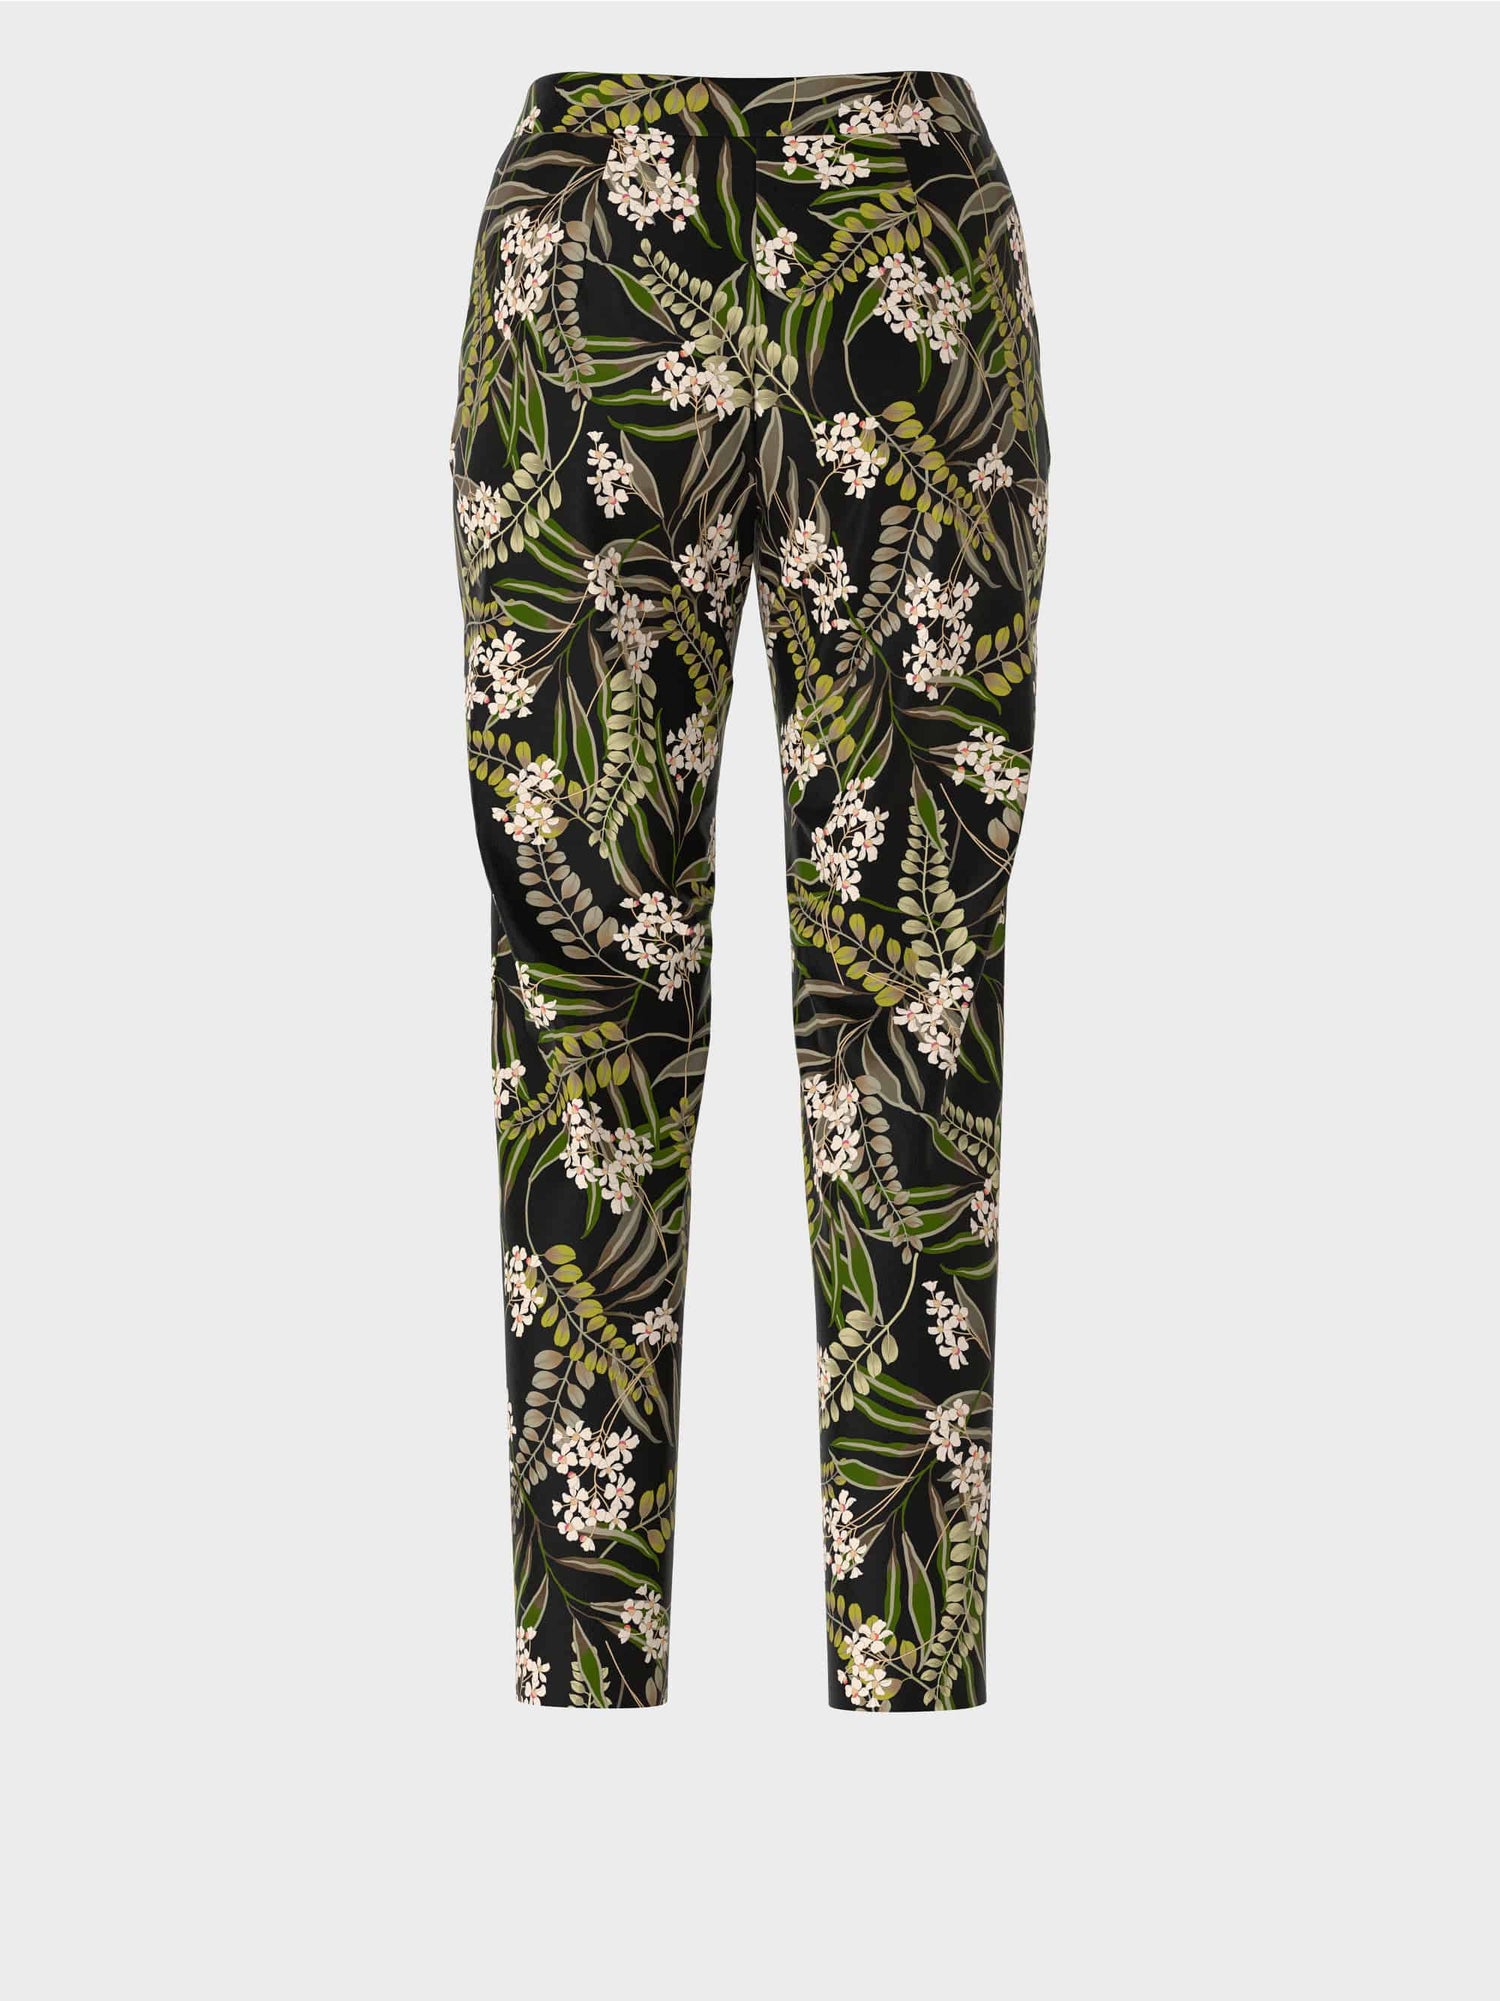 Fordon Jersey Pants With All-Over Print_VC 81.63 J37_900_06